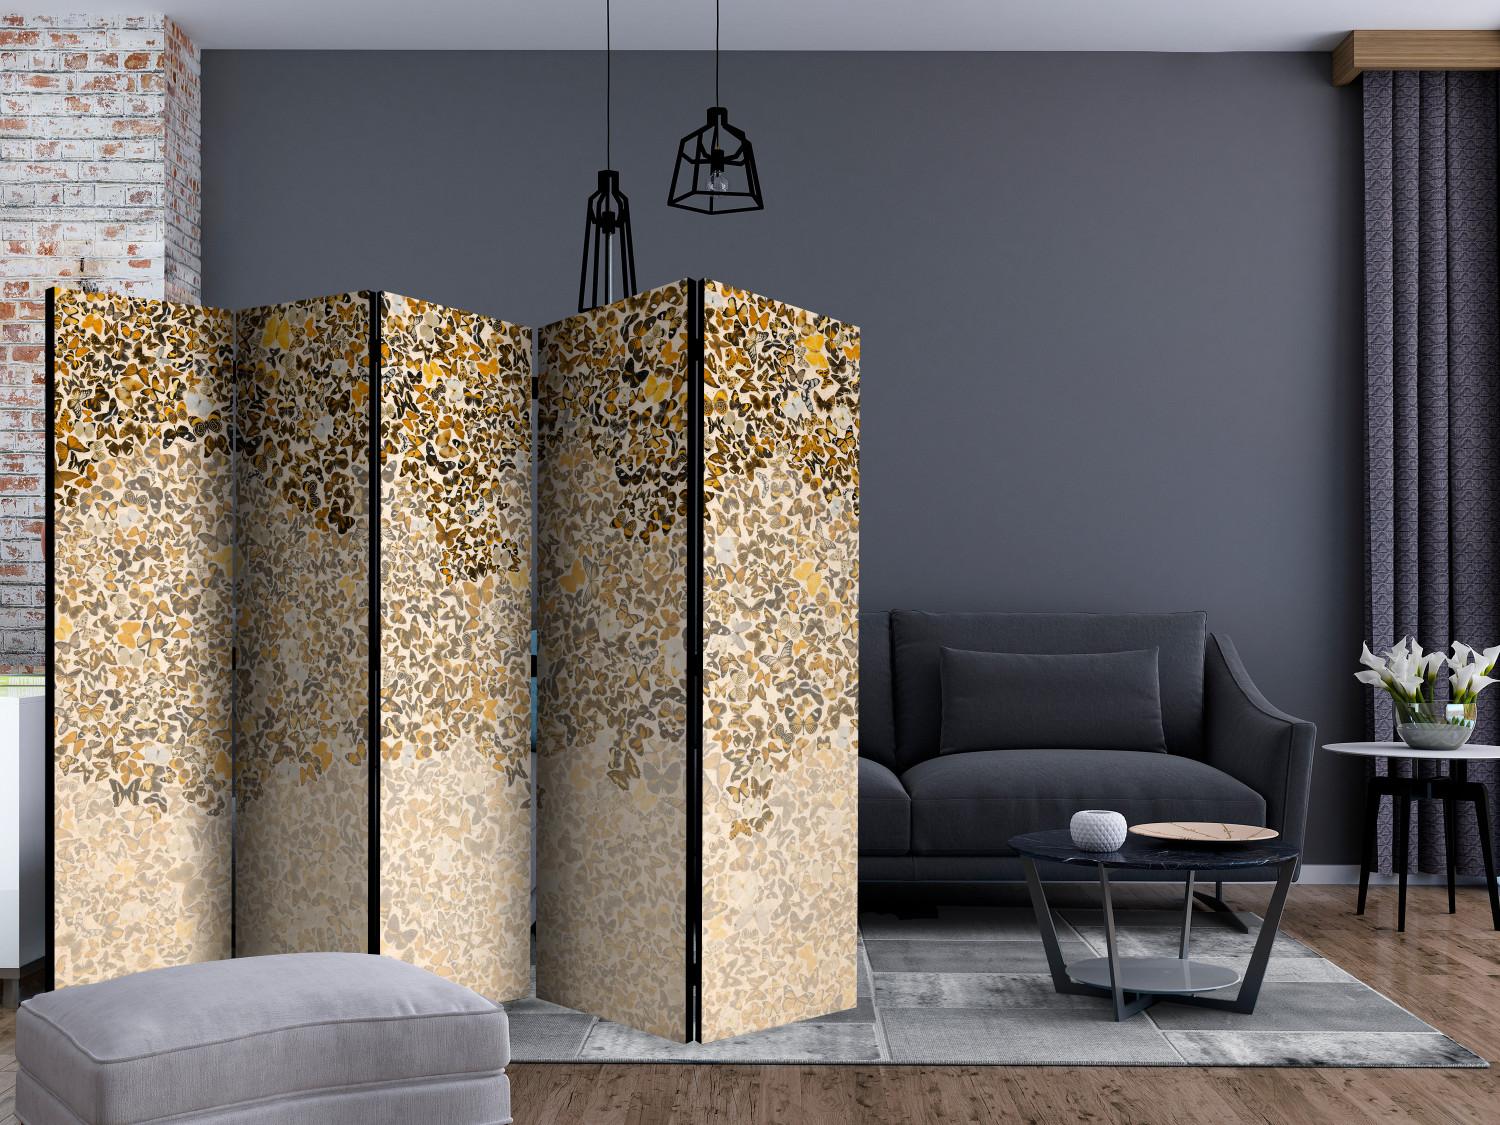 Room Divider Art and Butterflies II (5-piece) - pattern in shades of brown and beige